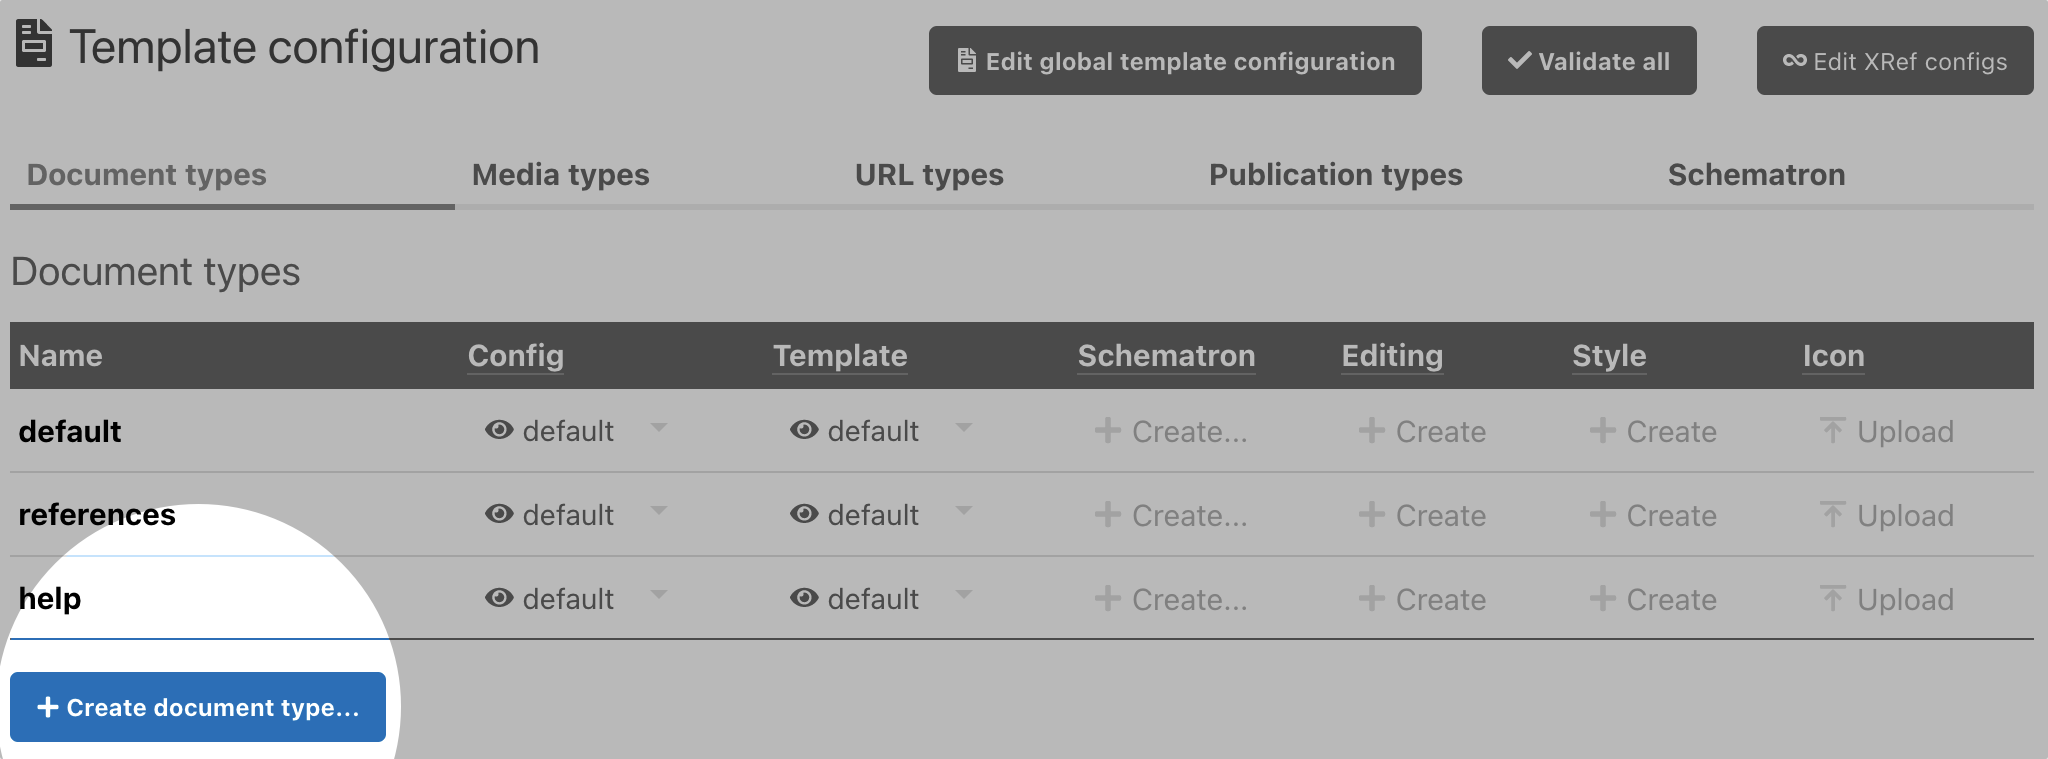 Template configuration page – Create document type